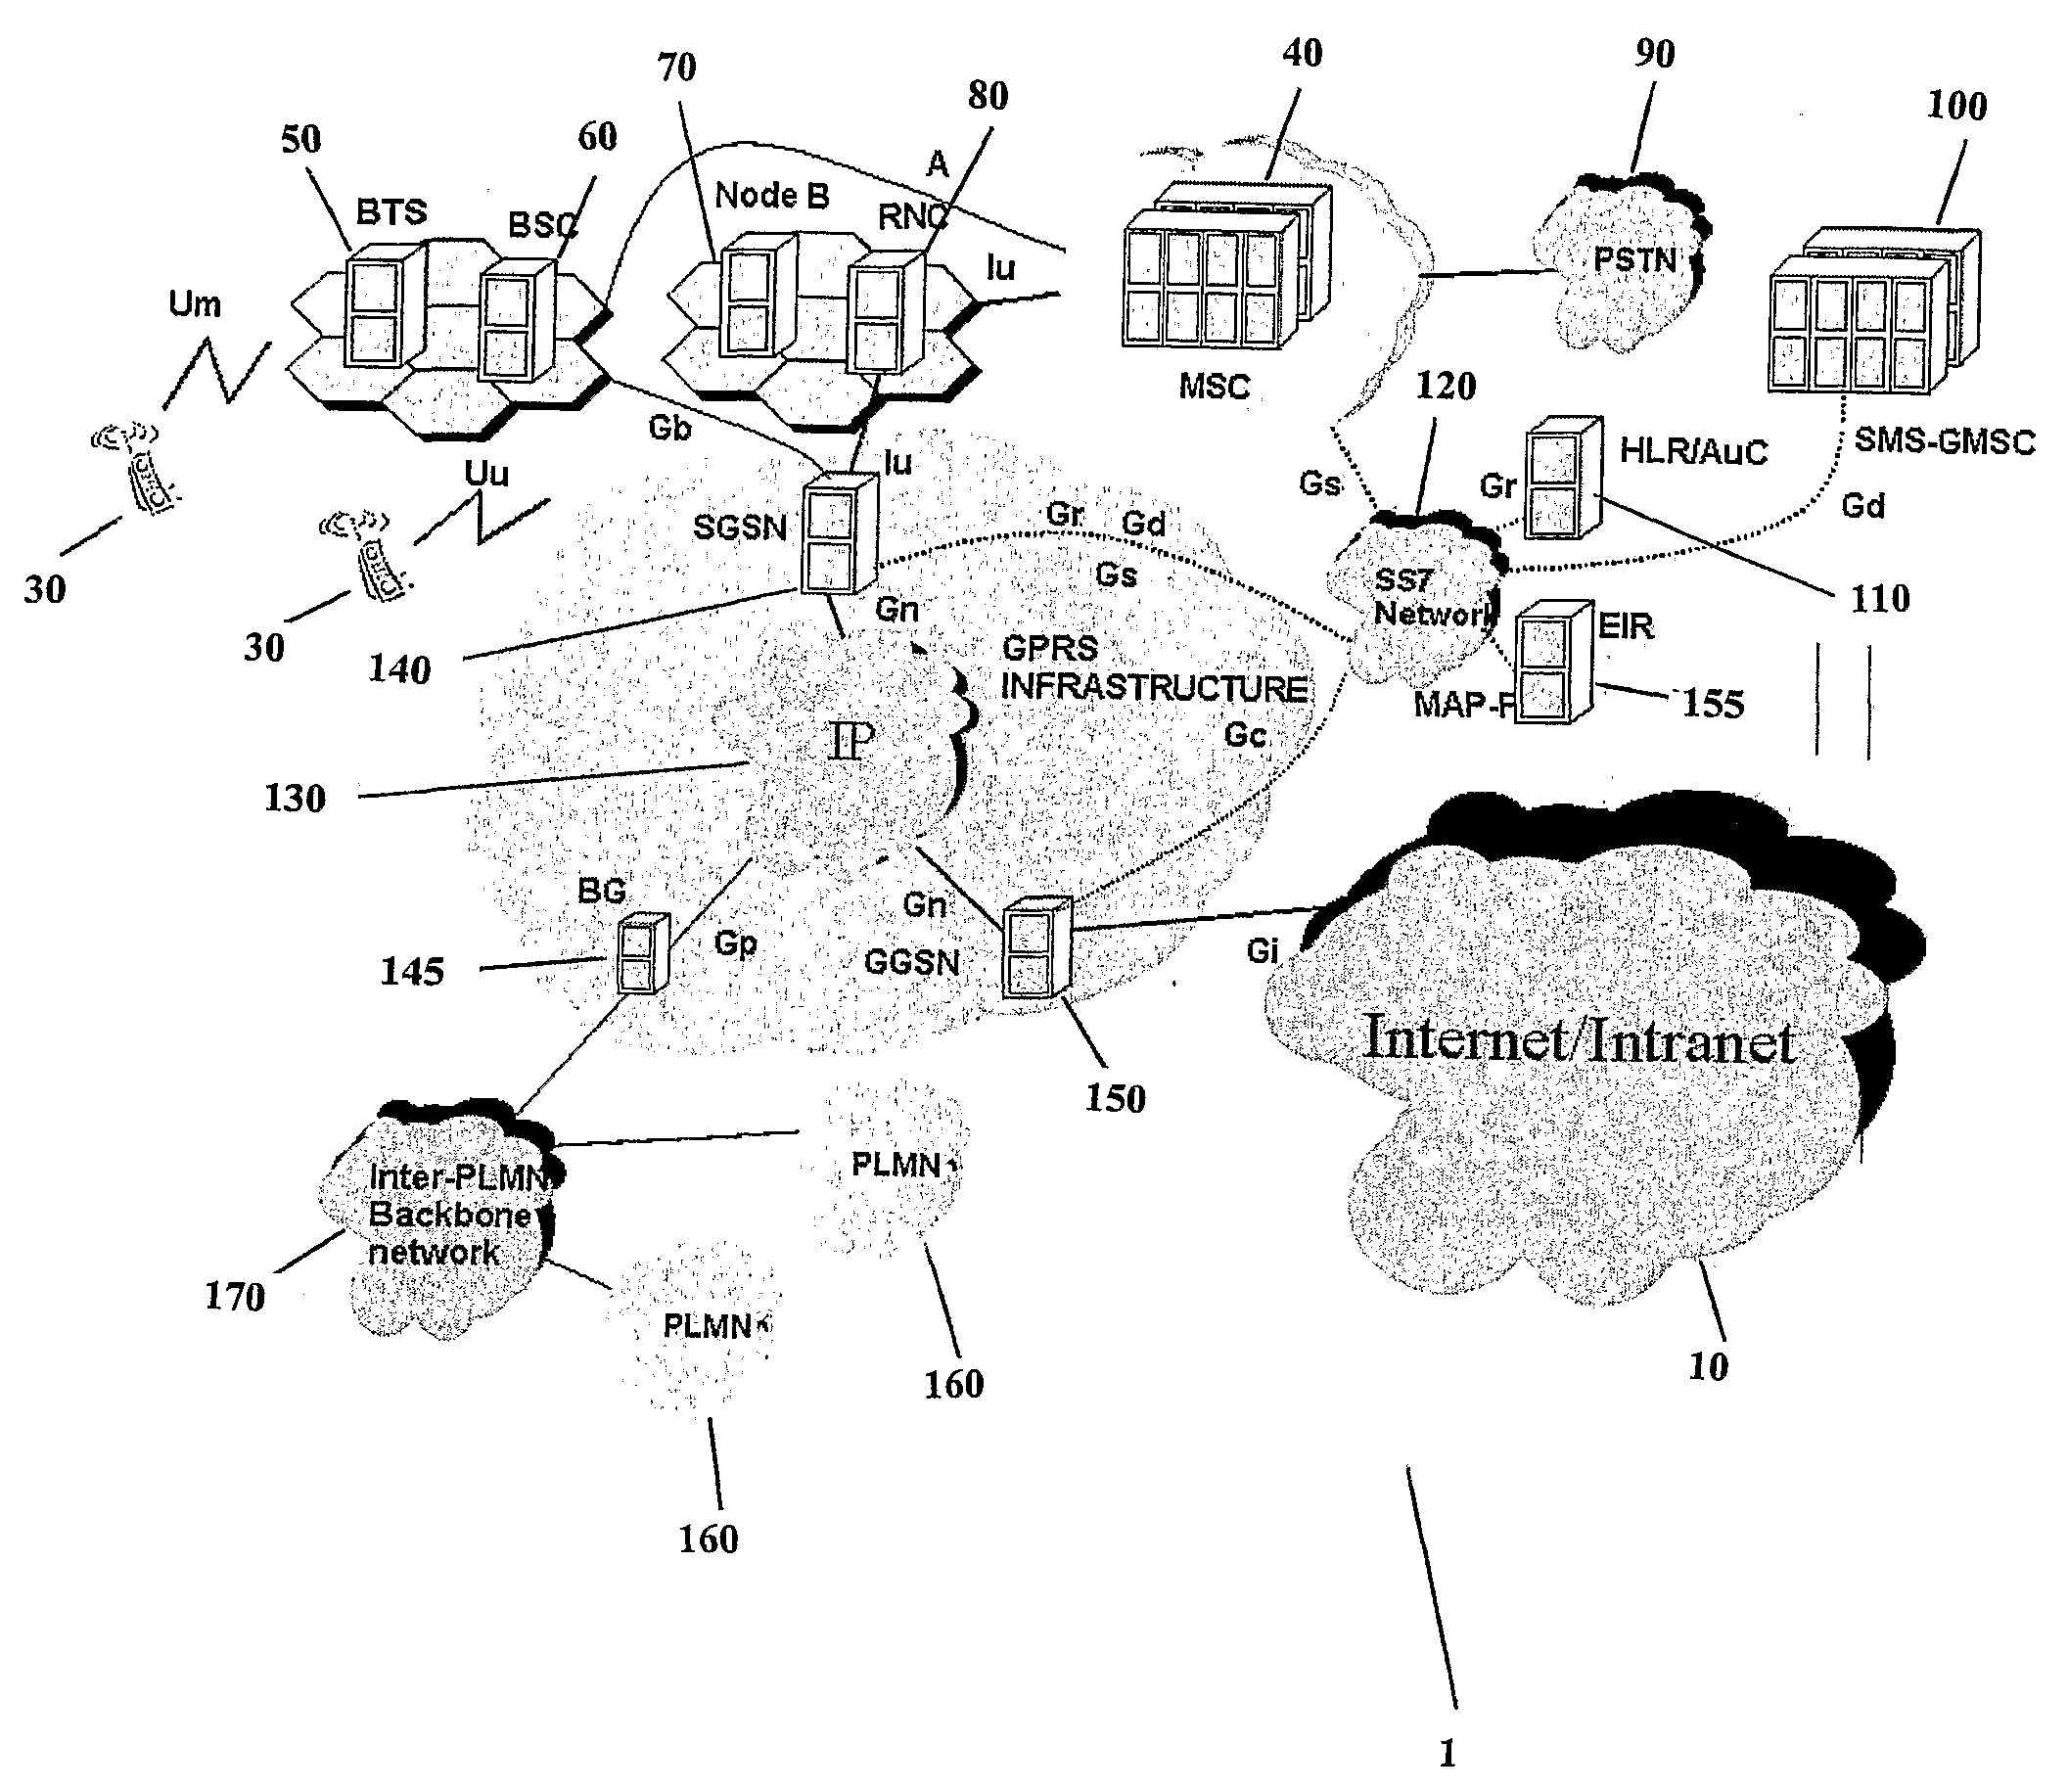 System and Method of Registering with an Access Point